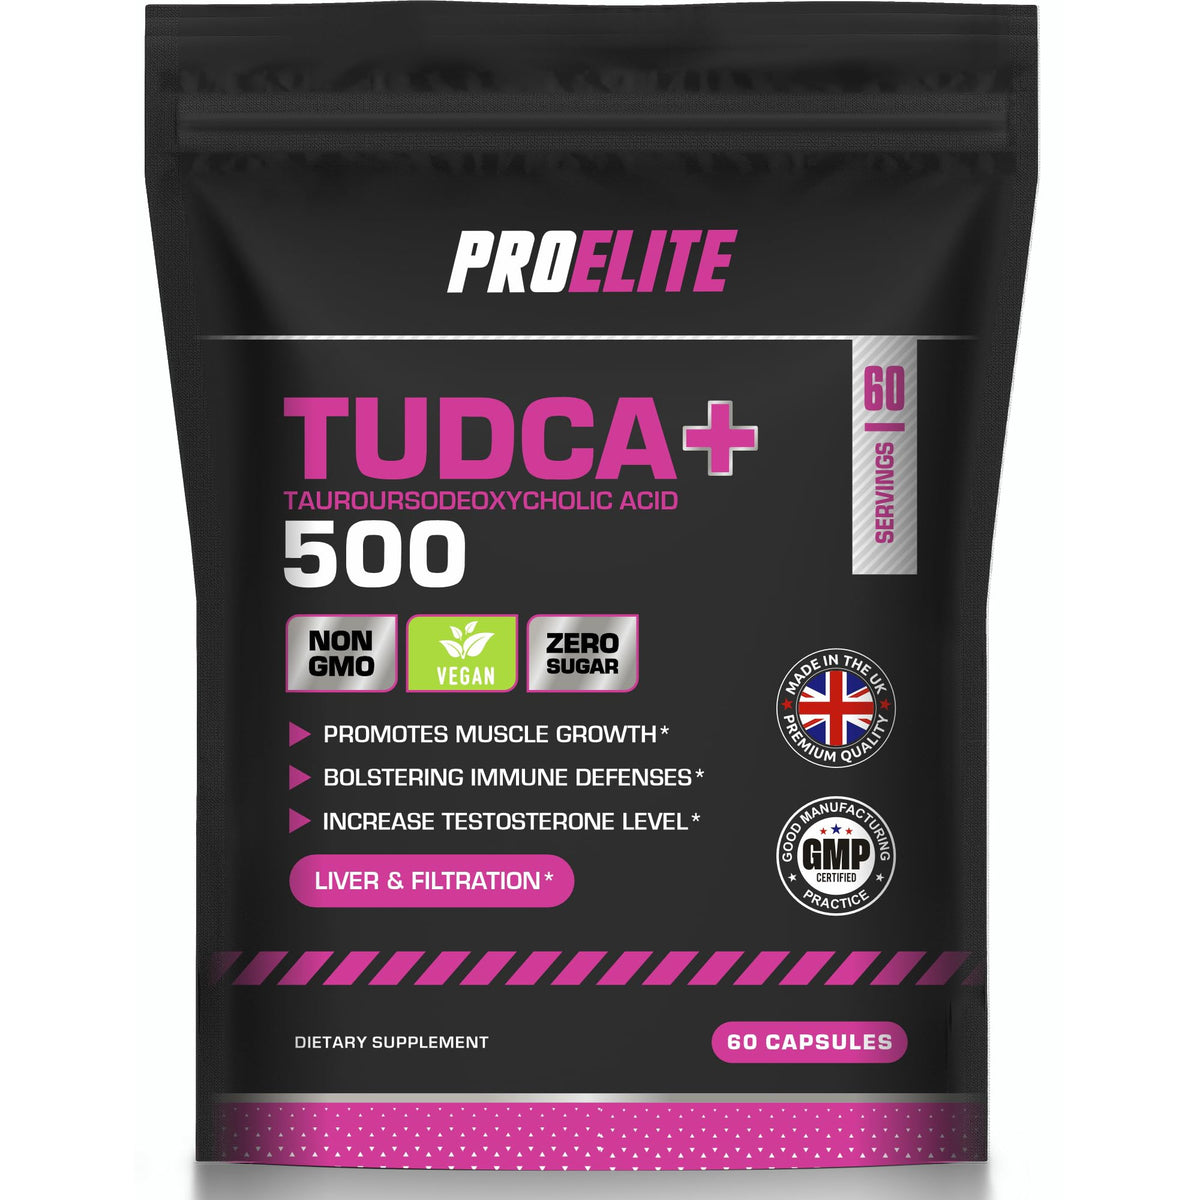 Tudca Tauroursodeoxycholic Acid Liver Support Bile Salt Supplement 60 Capsules Vegan - NO Fillres & Binders 100% Pure TUDCA - Supports Bile Production, Digestion and Immune System by PROELITE